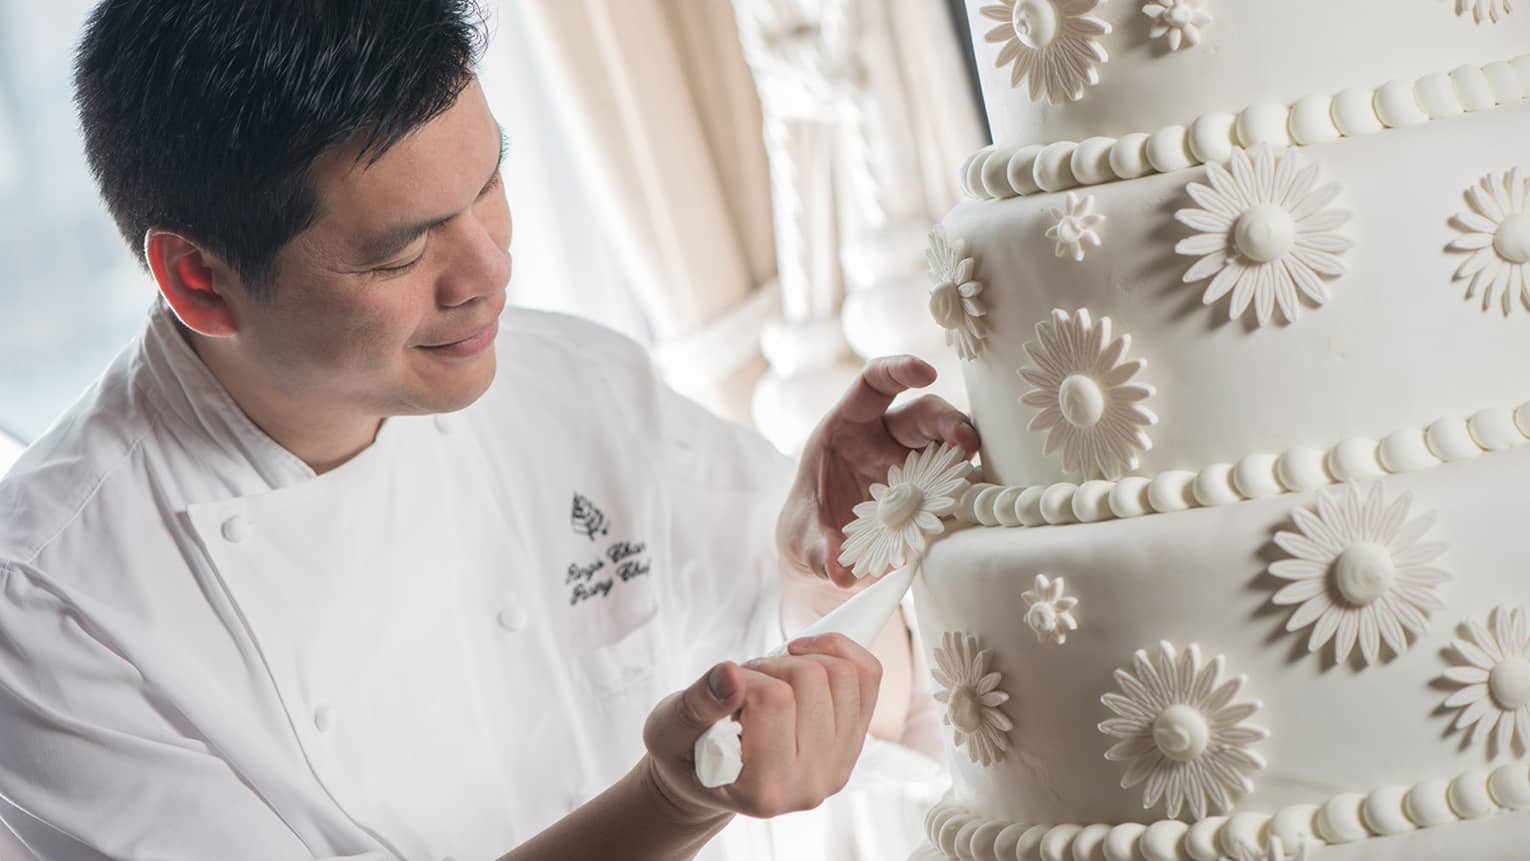 Pastry Chef Ringo Chan decorates icing of large tiered wedding cake